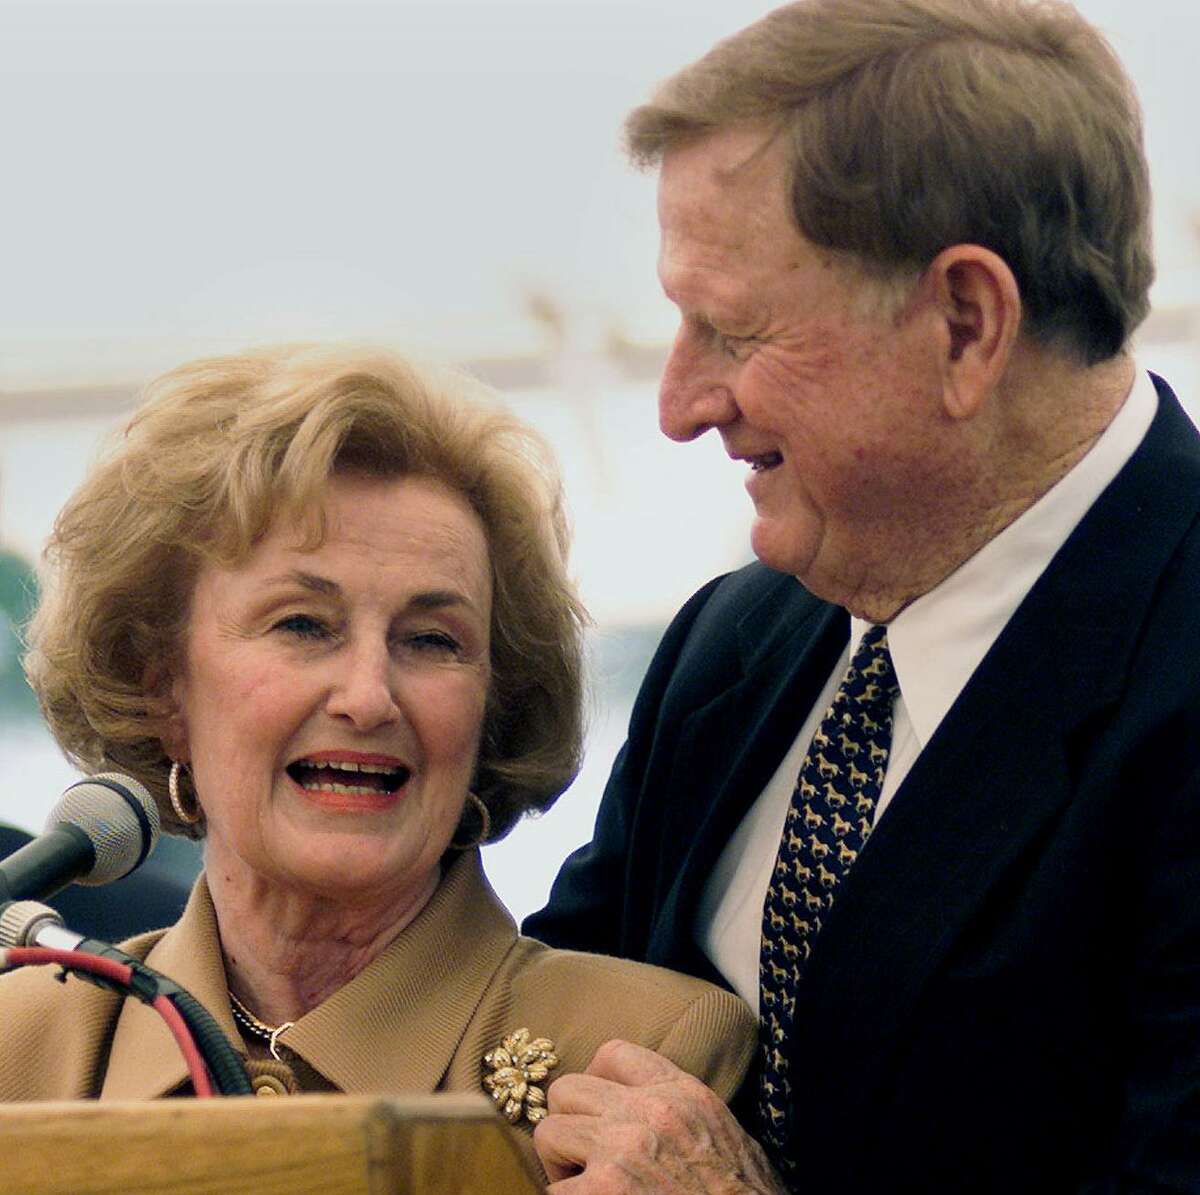 Red McCombs embraces his wife Charline as the two appear at ceremonies marking the dedication of the McCombs School of Business at the University of Texas in Austin on October 26, 2001.